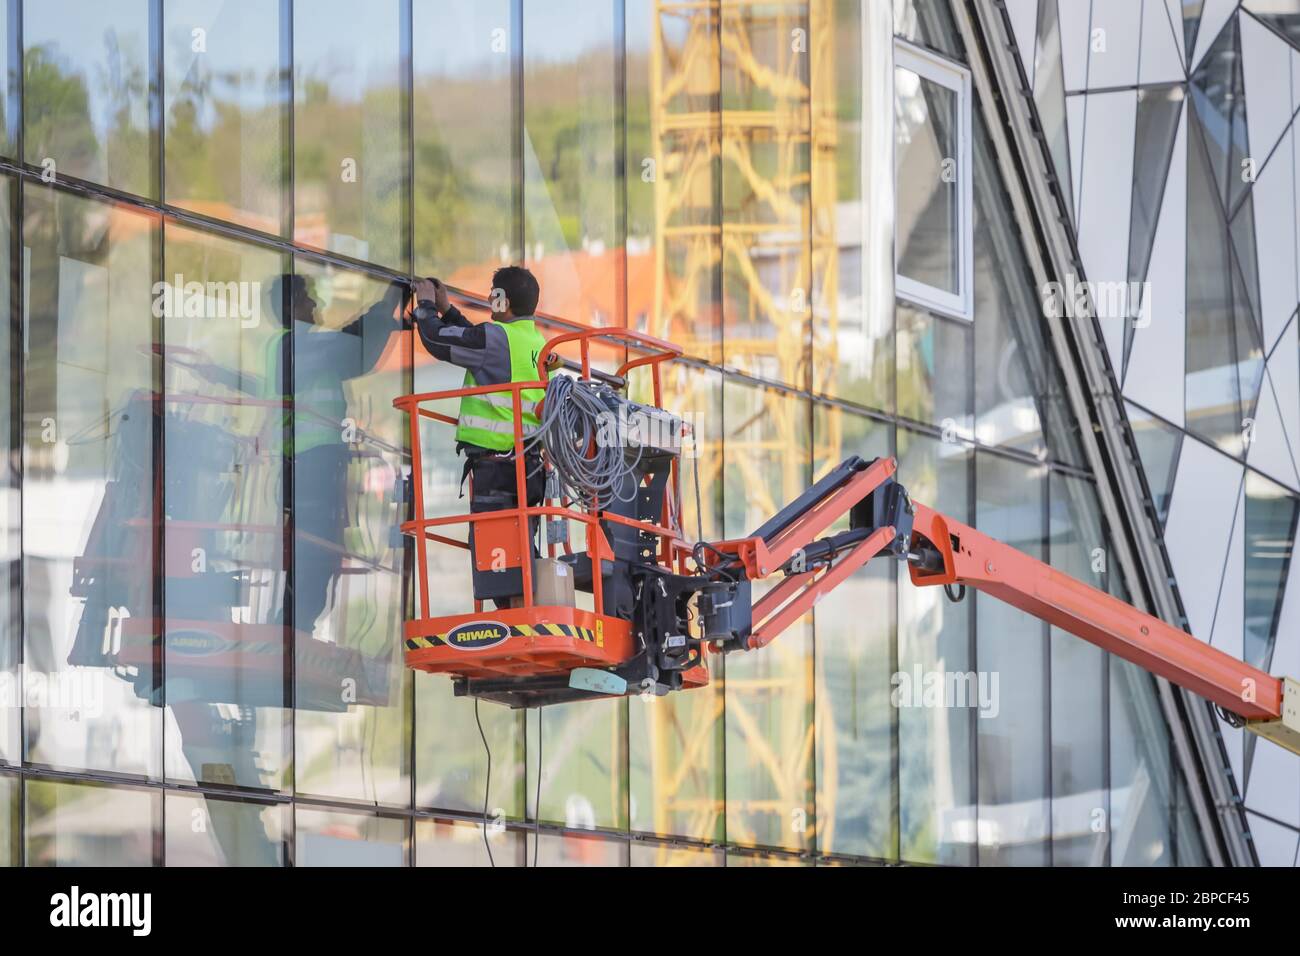 Zagreb, Croatia - 16 April, 2020 : Workers working on the construction site of the new building for cable car that goes to the top of the Medvednica N Stock Photo